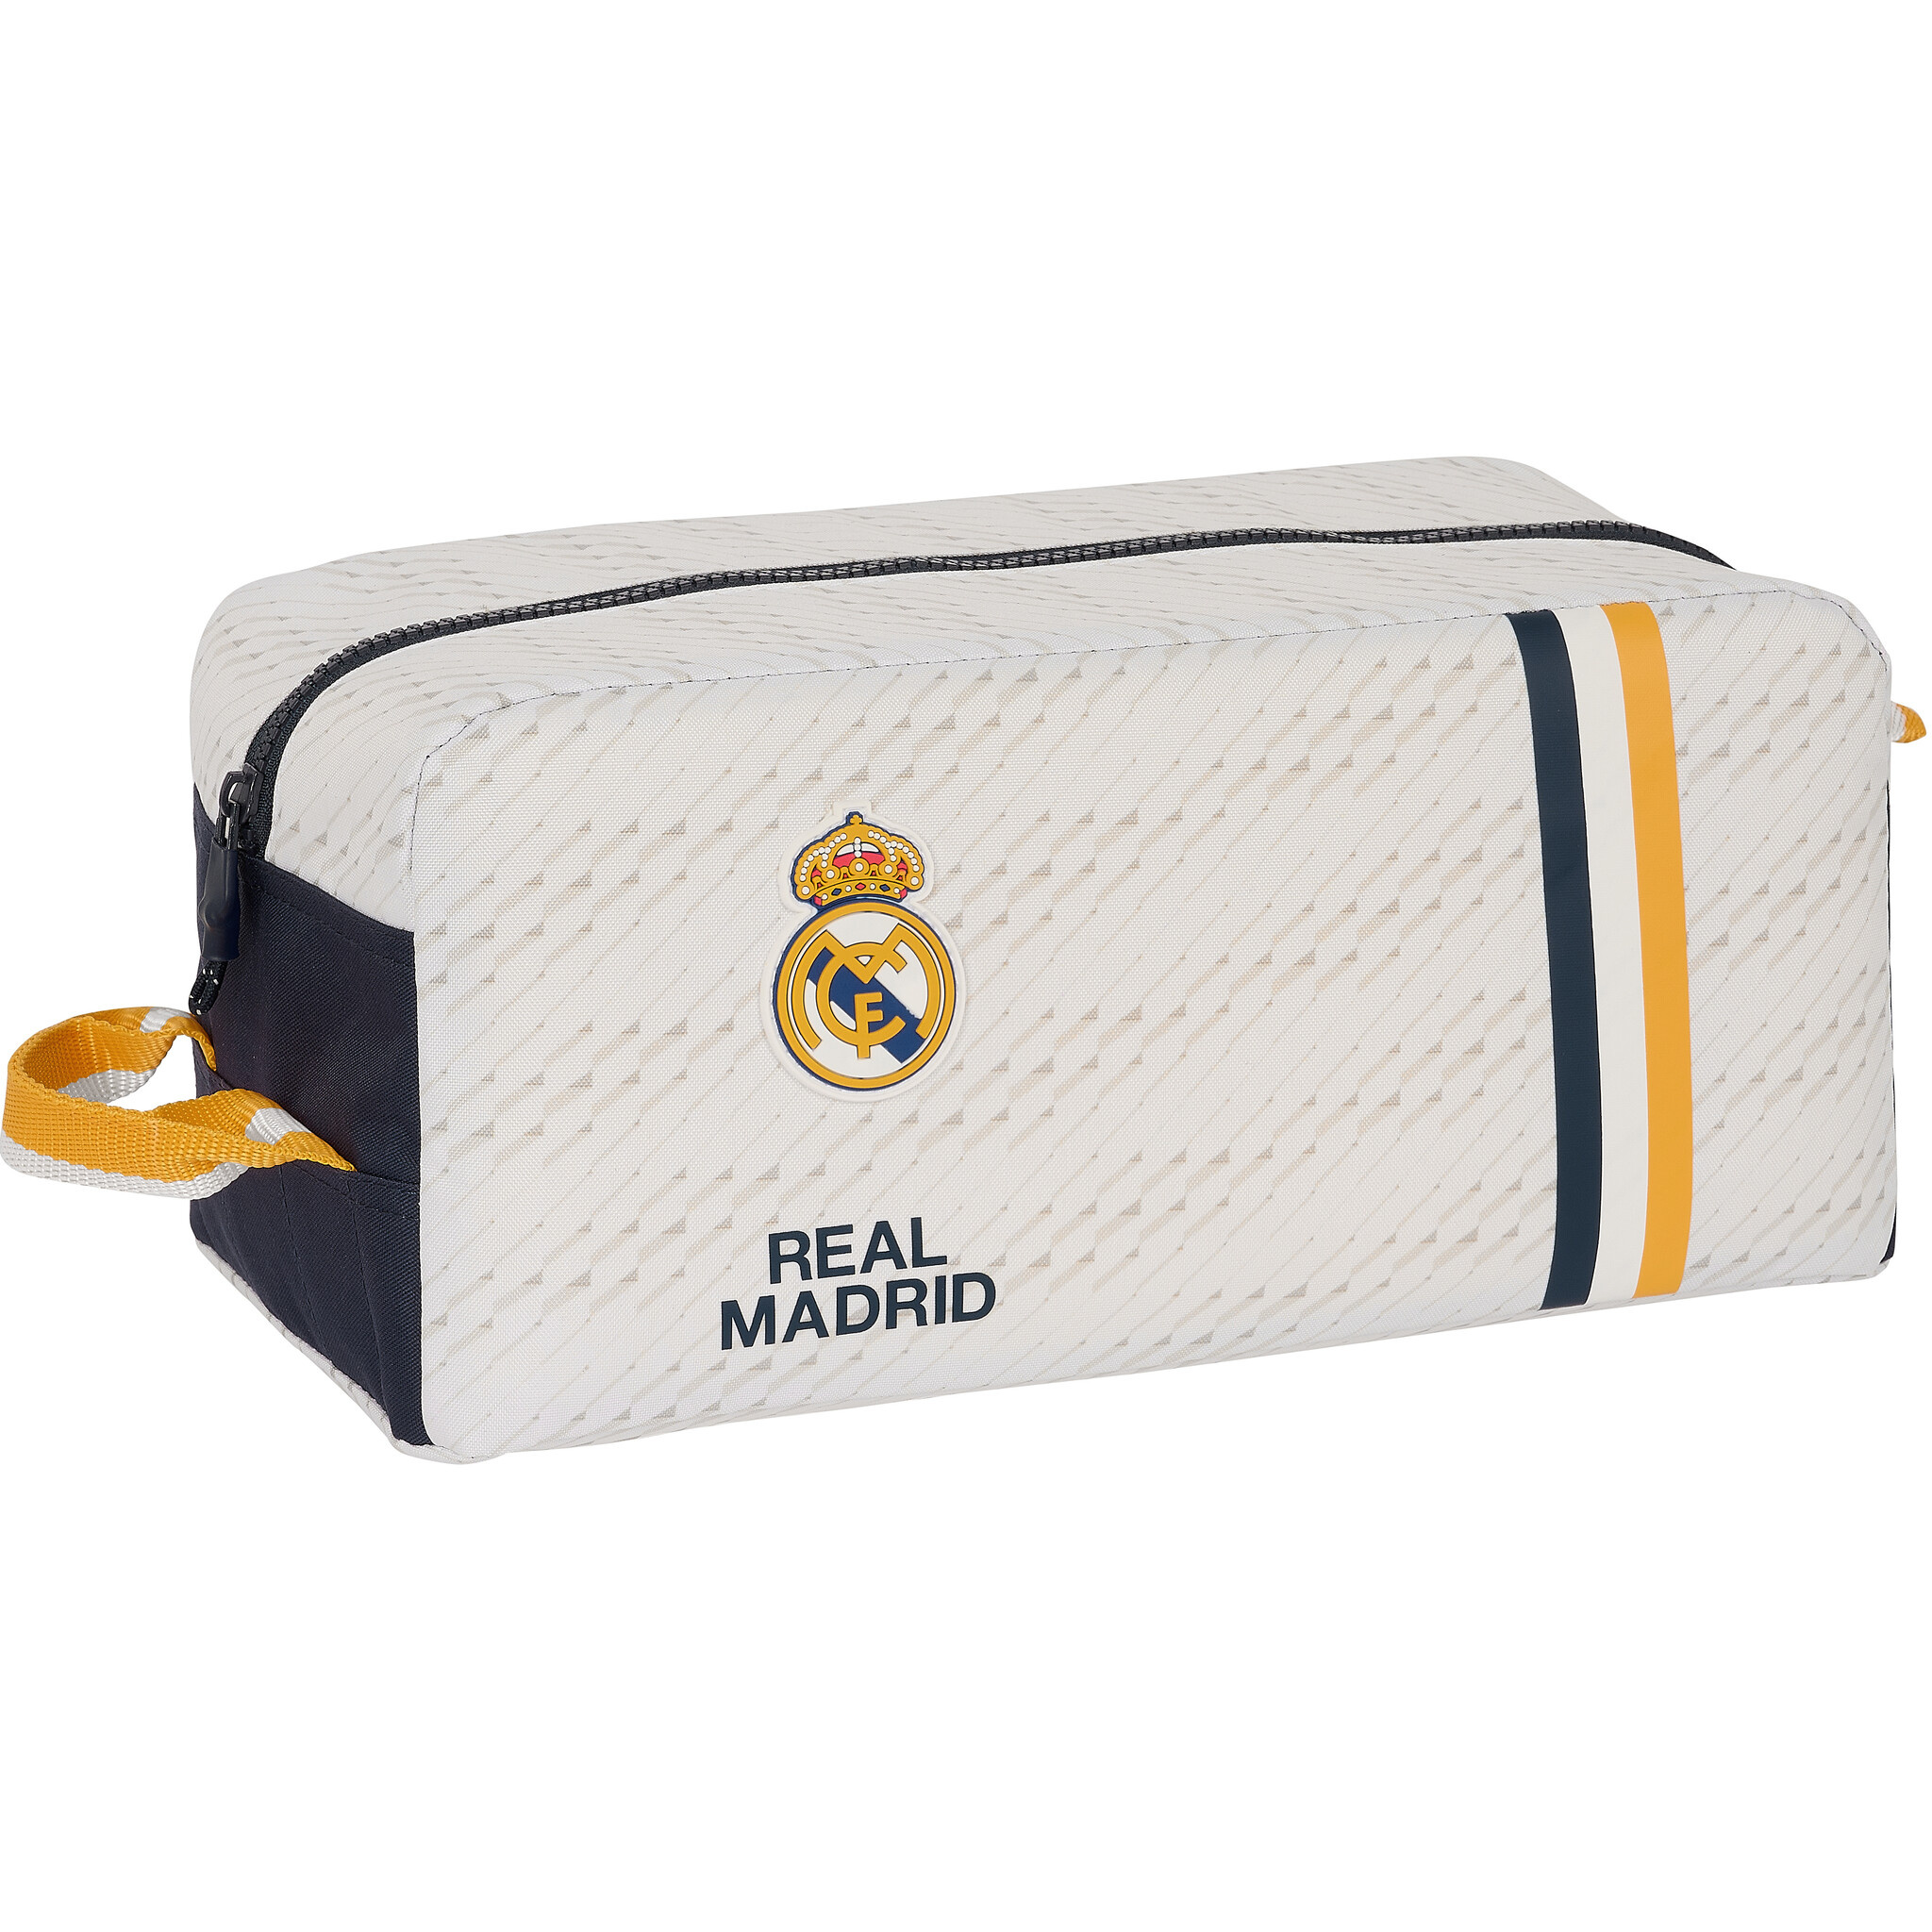 Real Madrid shoe/toiletry bag - 34 x 18 x 15 cm - Polyester